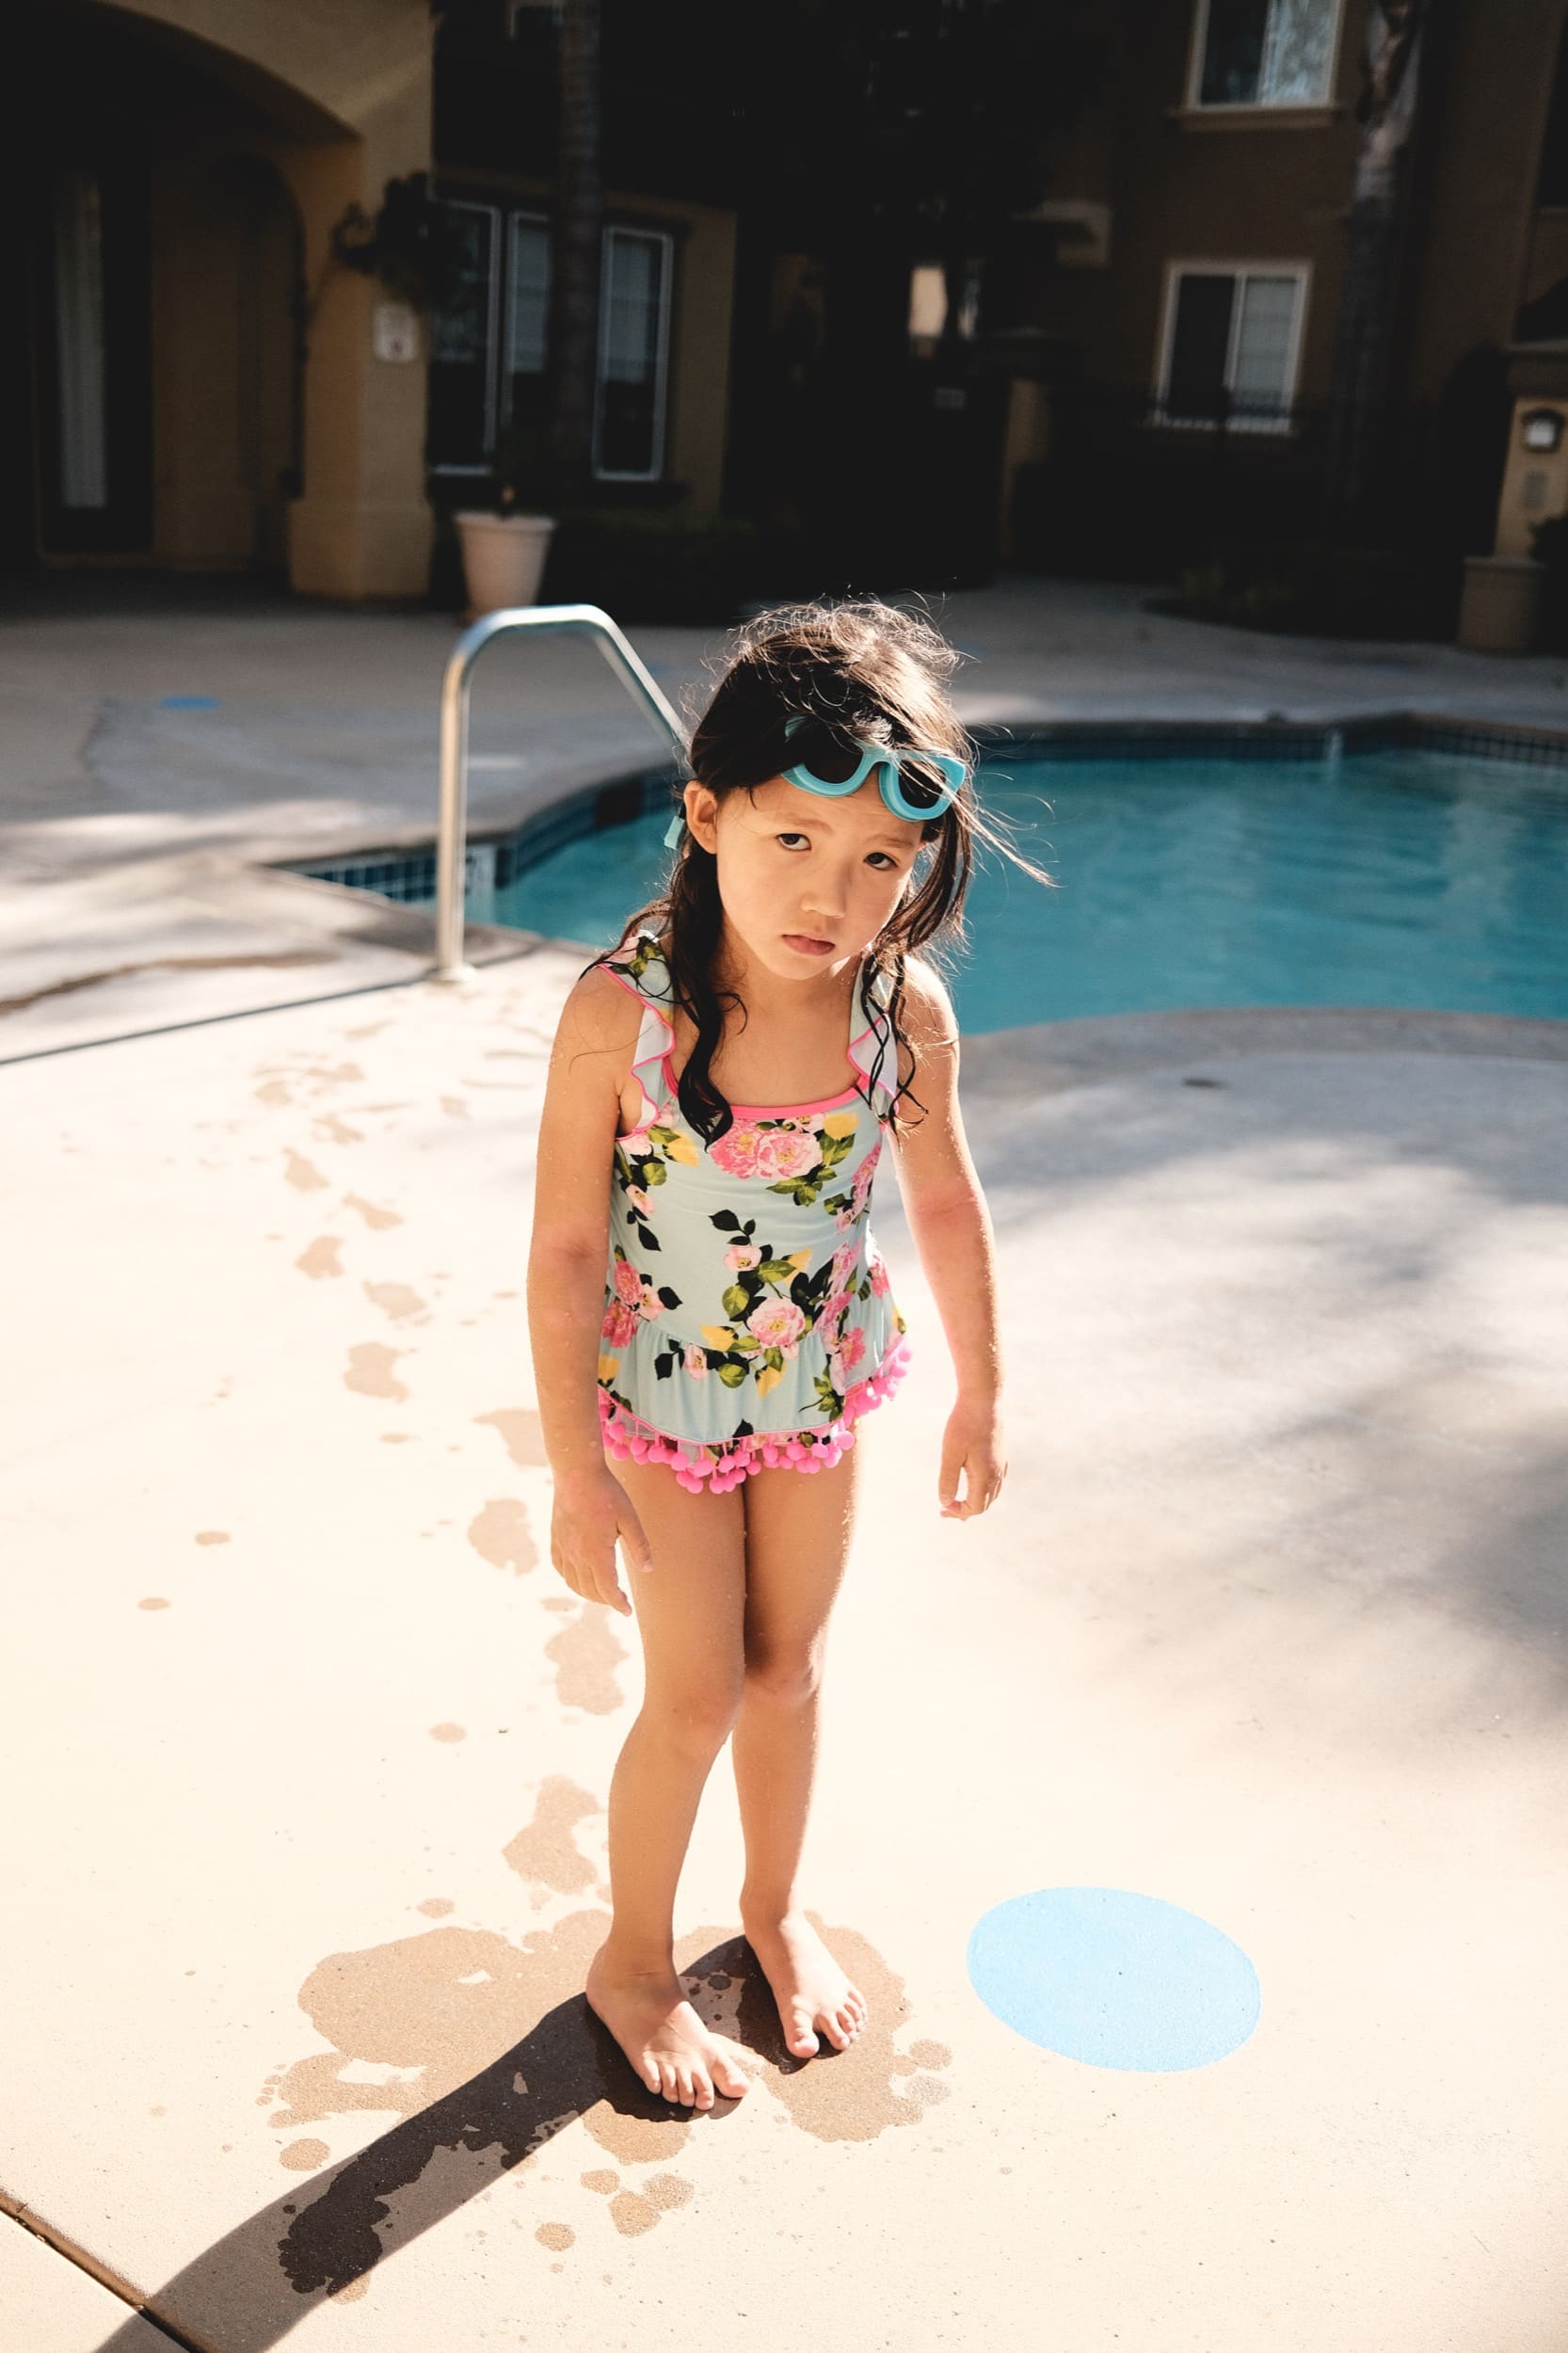 wet and cold little girl at the pool.